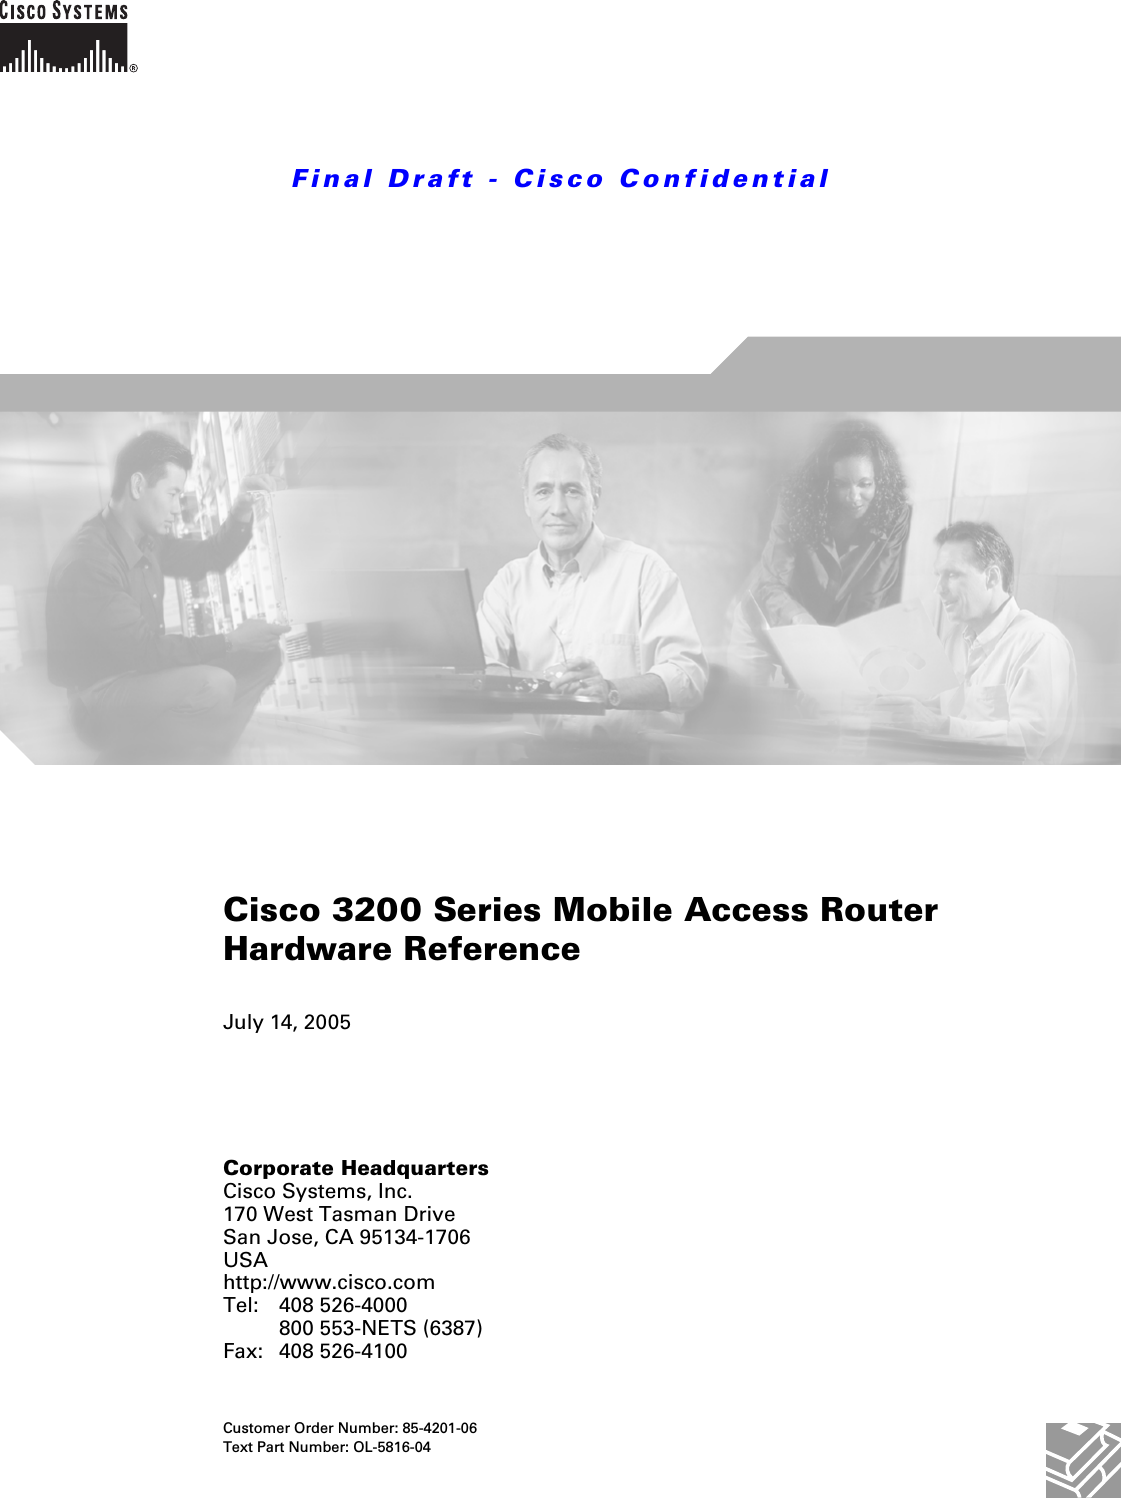 Final Draft - Cisco ConfidentialCorporate HeadquartersCisco Systems, Inc.170 West Tasman DriveSan Jose, CA 95134-1706 USAhttp://www.cisco.comTel: 408 526-4000800 553-NETS (6387)Fax: 408 526-4100Cisco 3200 Series Mobile Access Router Hardware ReferenceJuly 14, 2005Customer Order Number: 85-4201-06Text Part Number: OL-5816-04